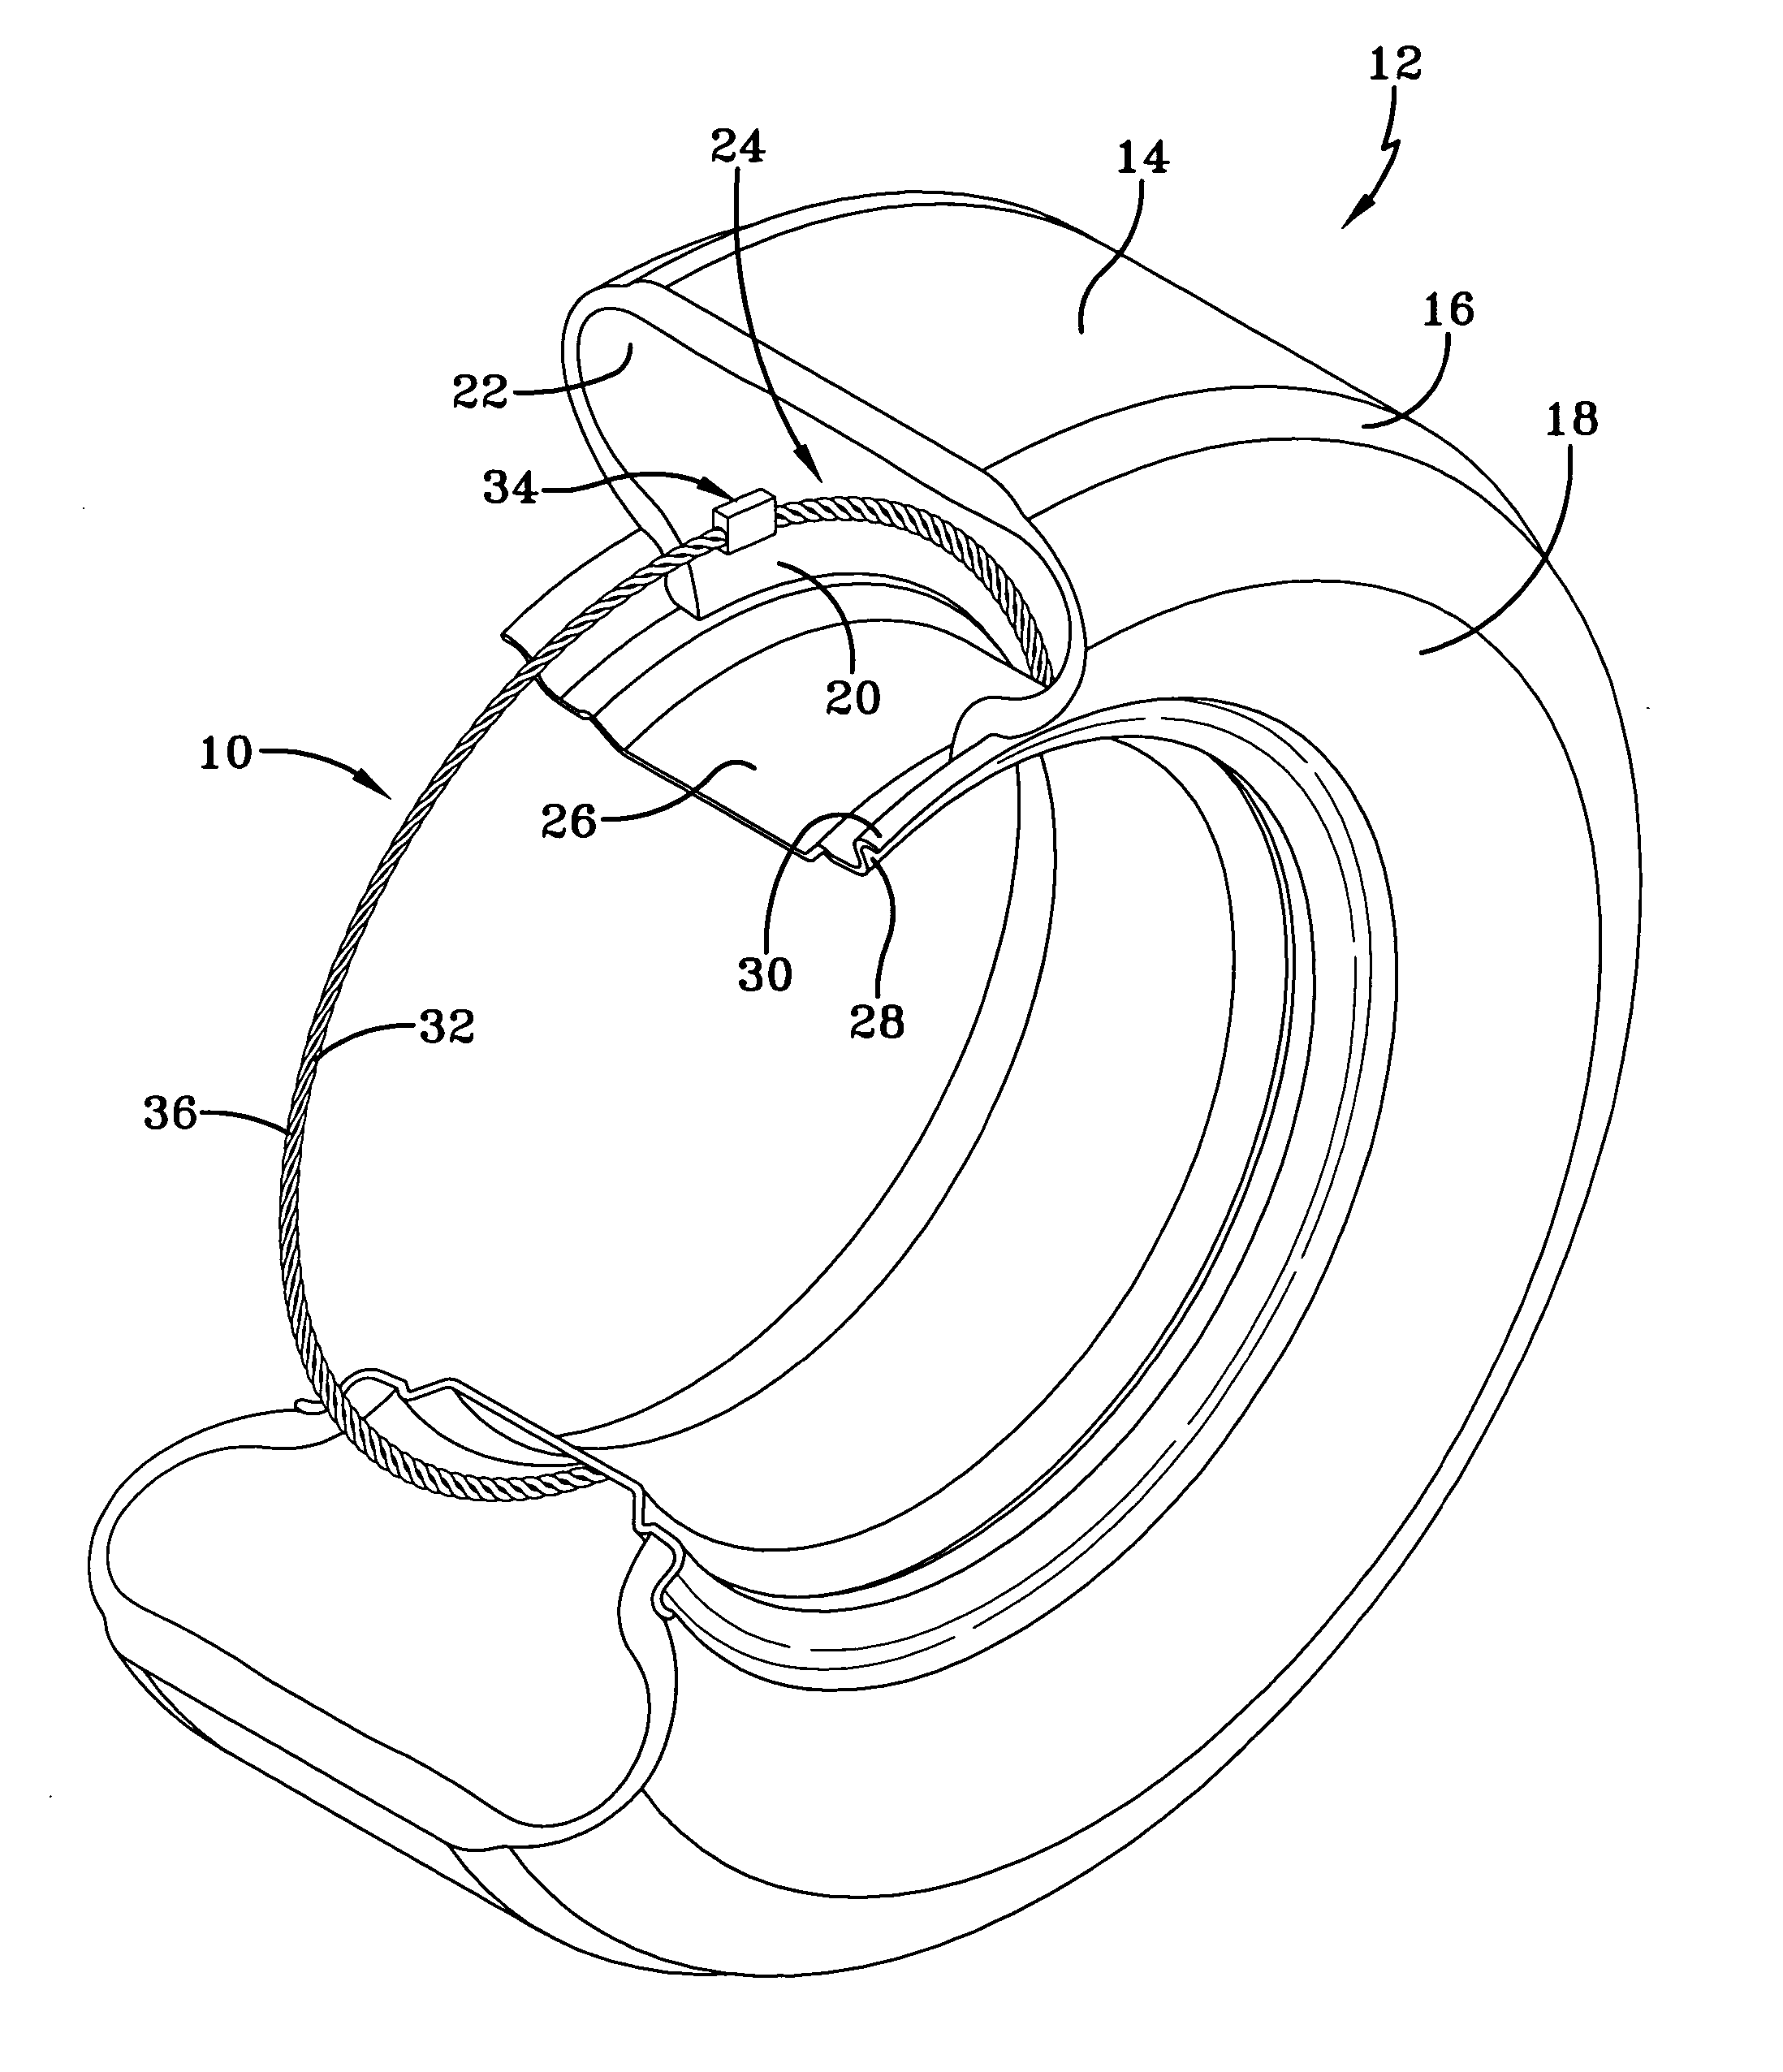 Flexible tinsel ribbon antenna and assembly method for a tire